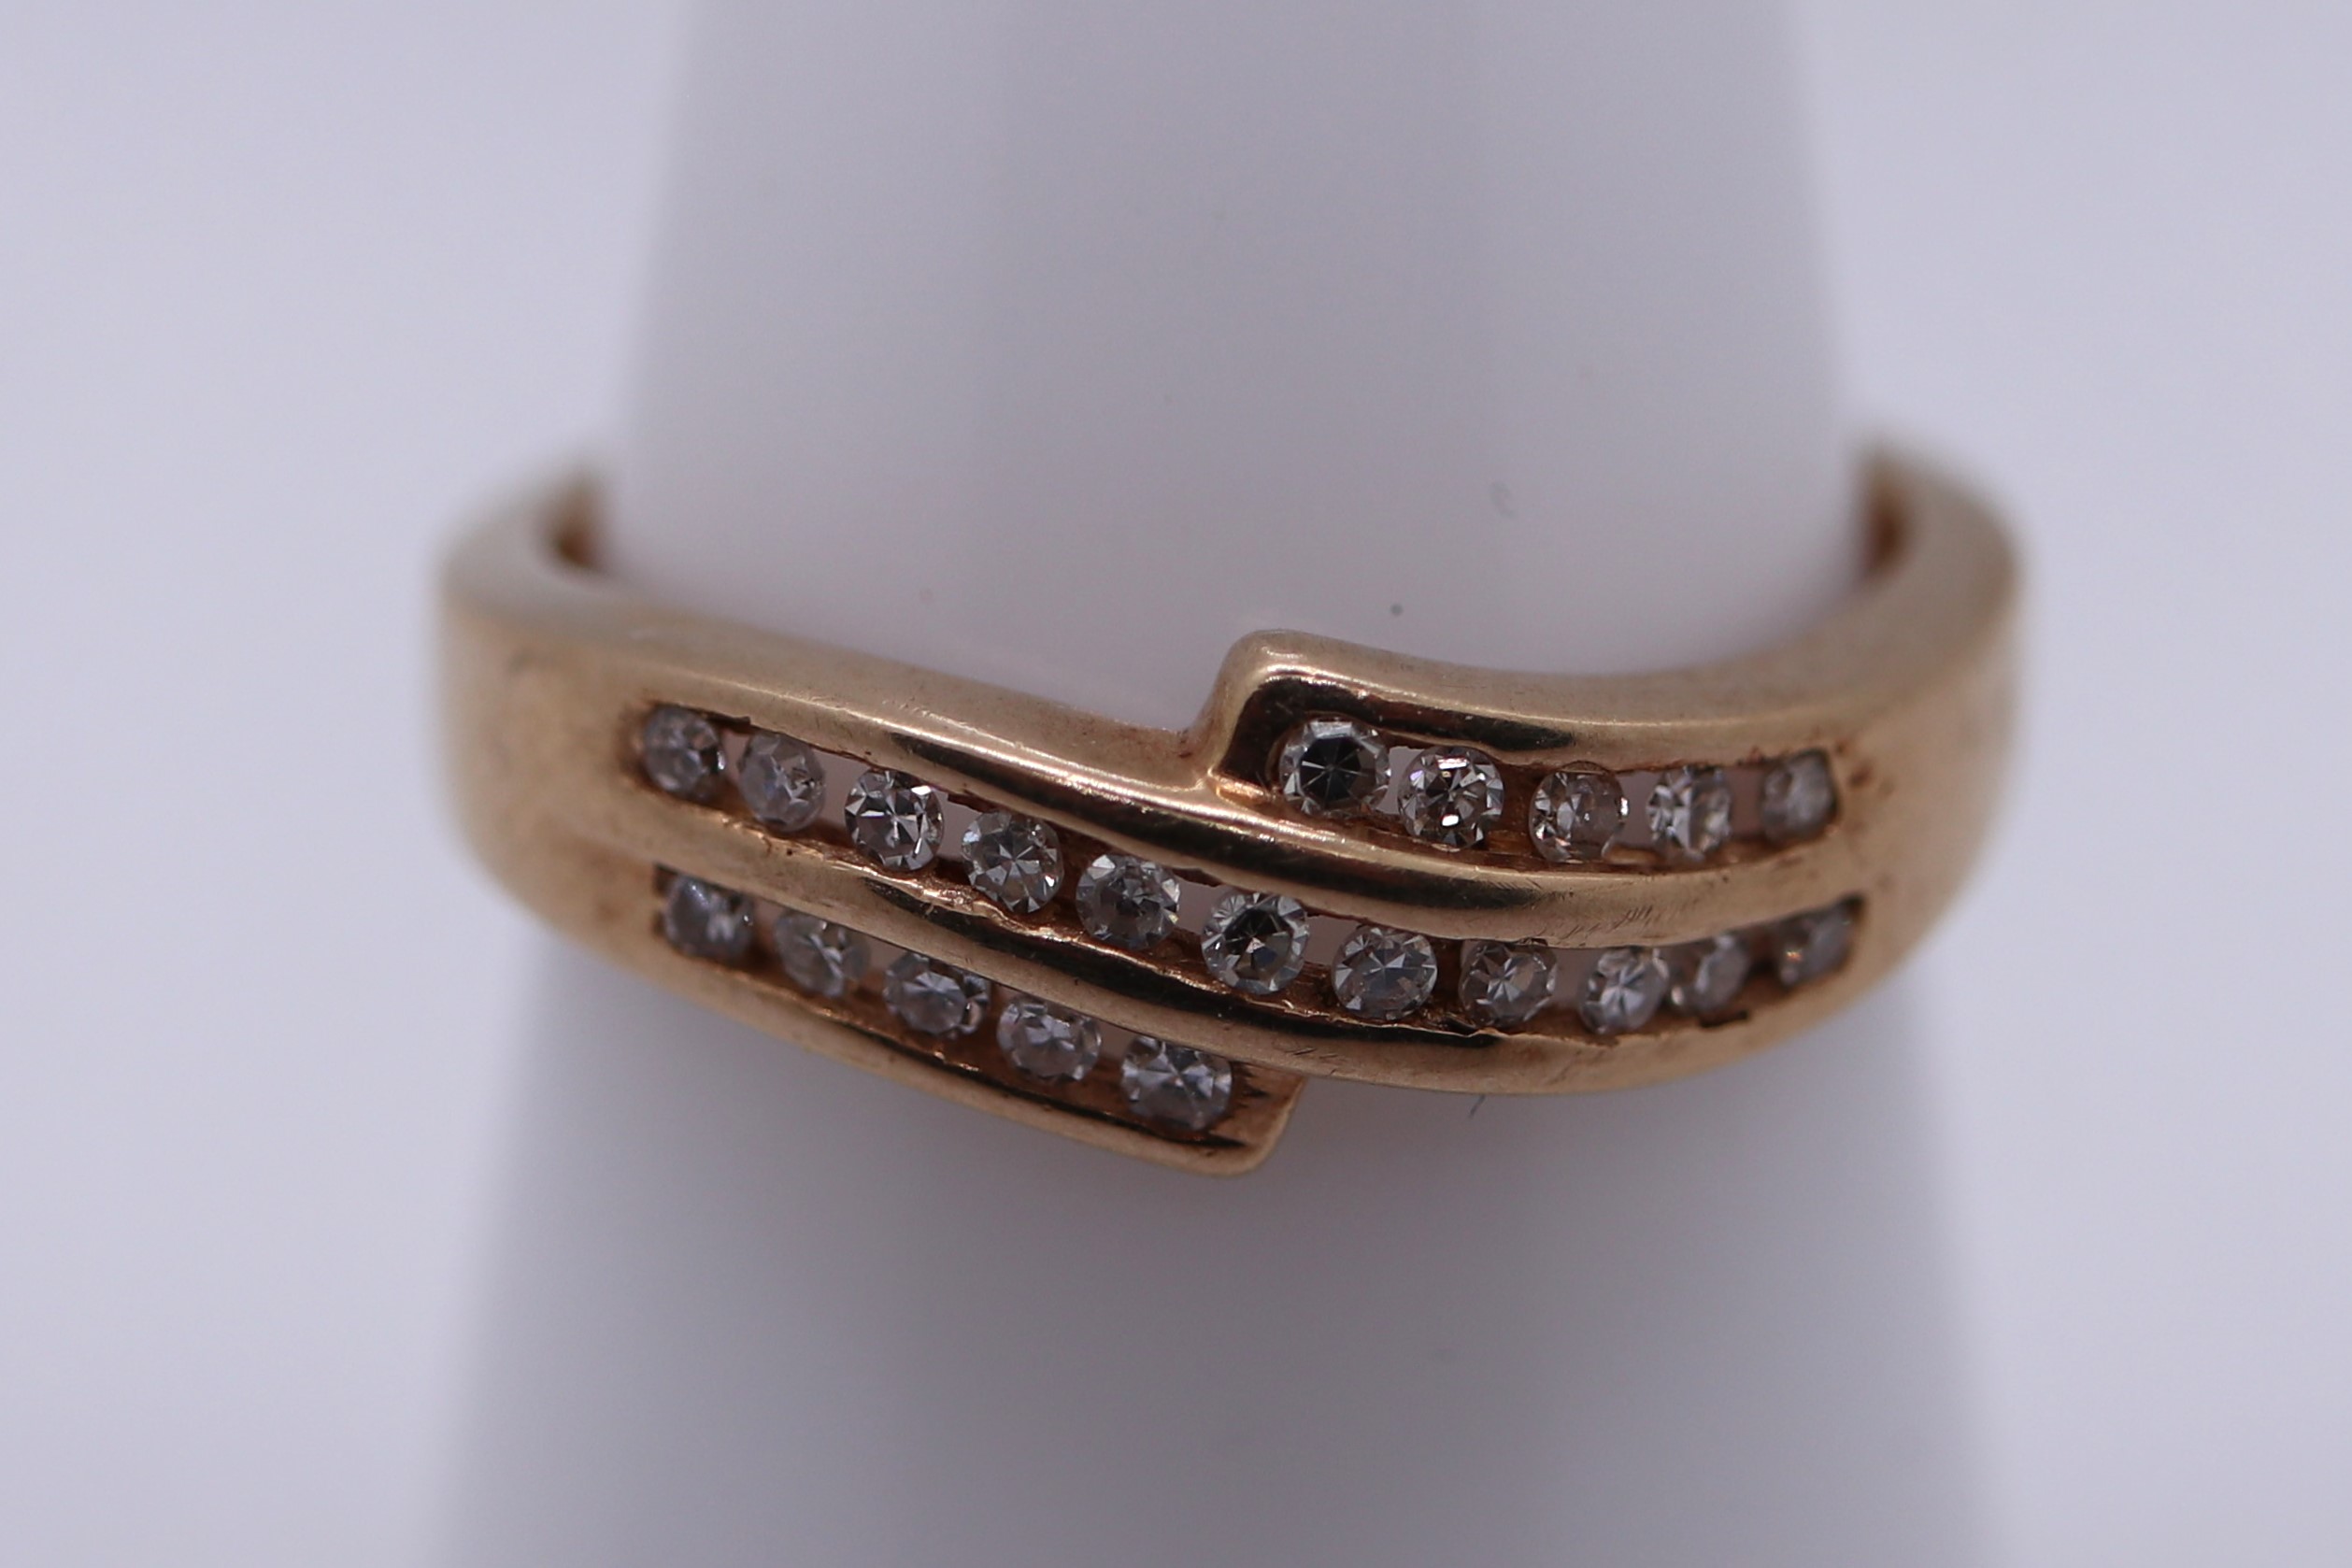 9ct gold channel set diamond ring - Size M - Image 3 of 3